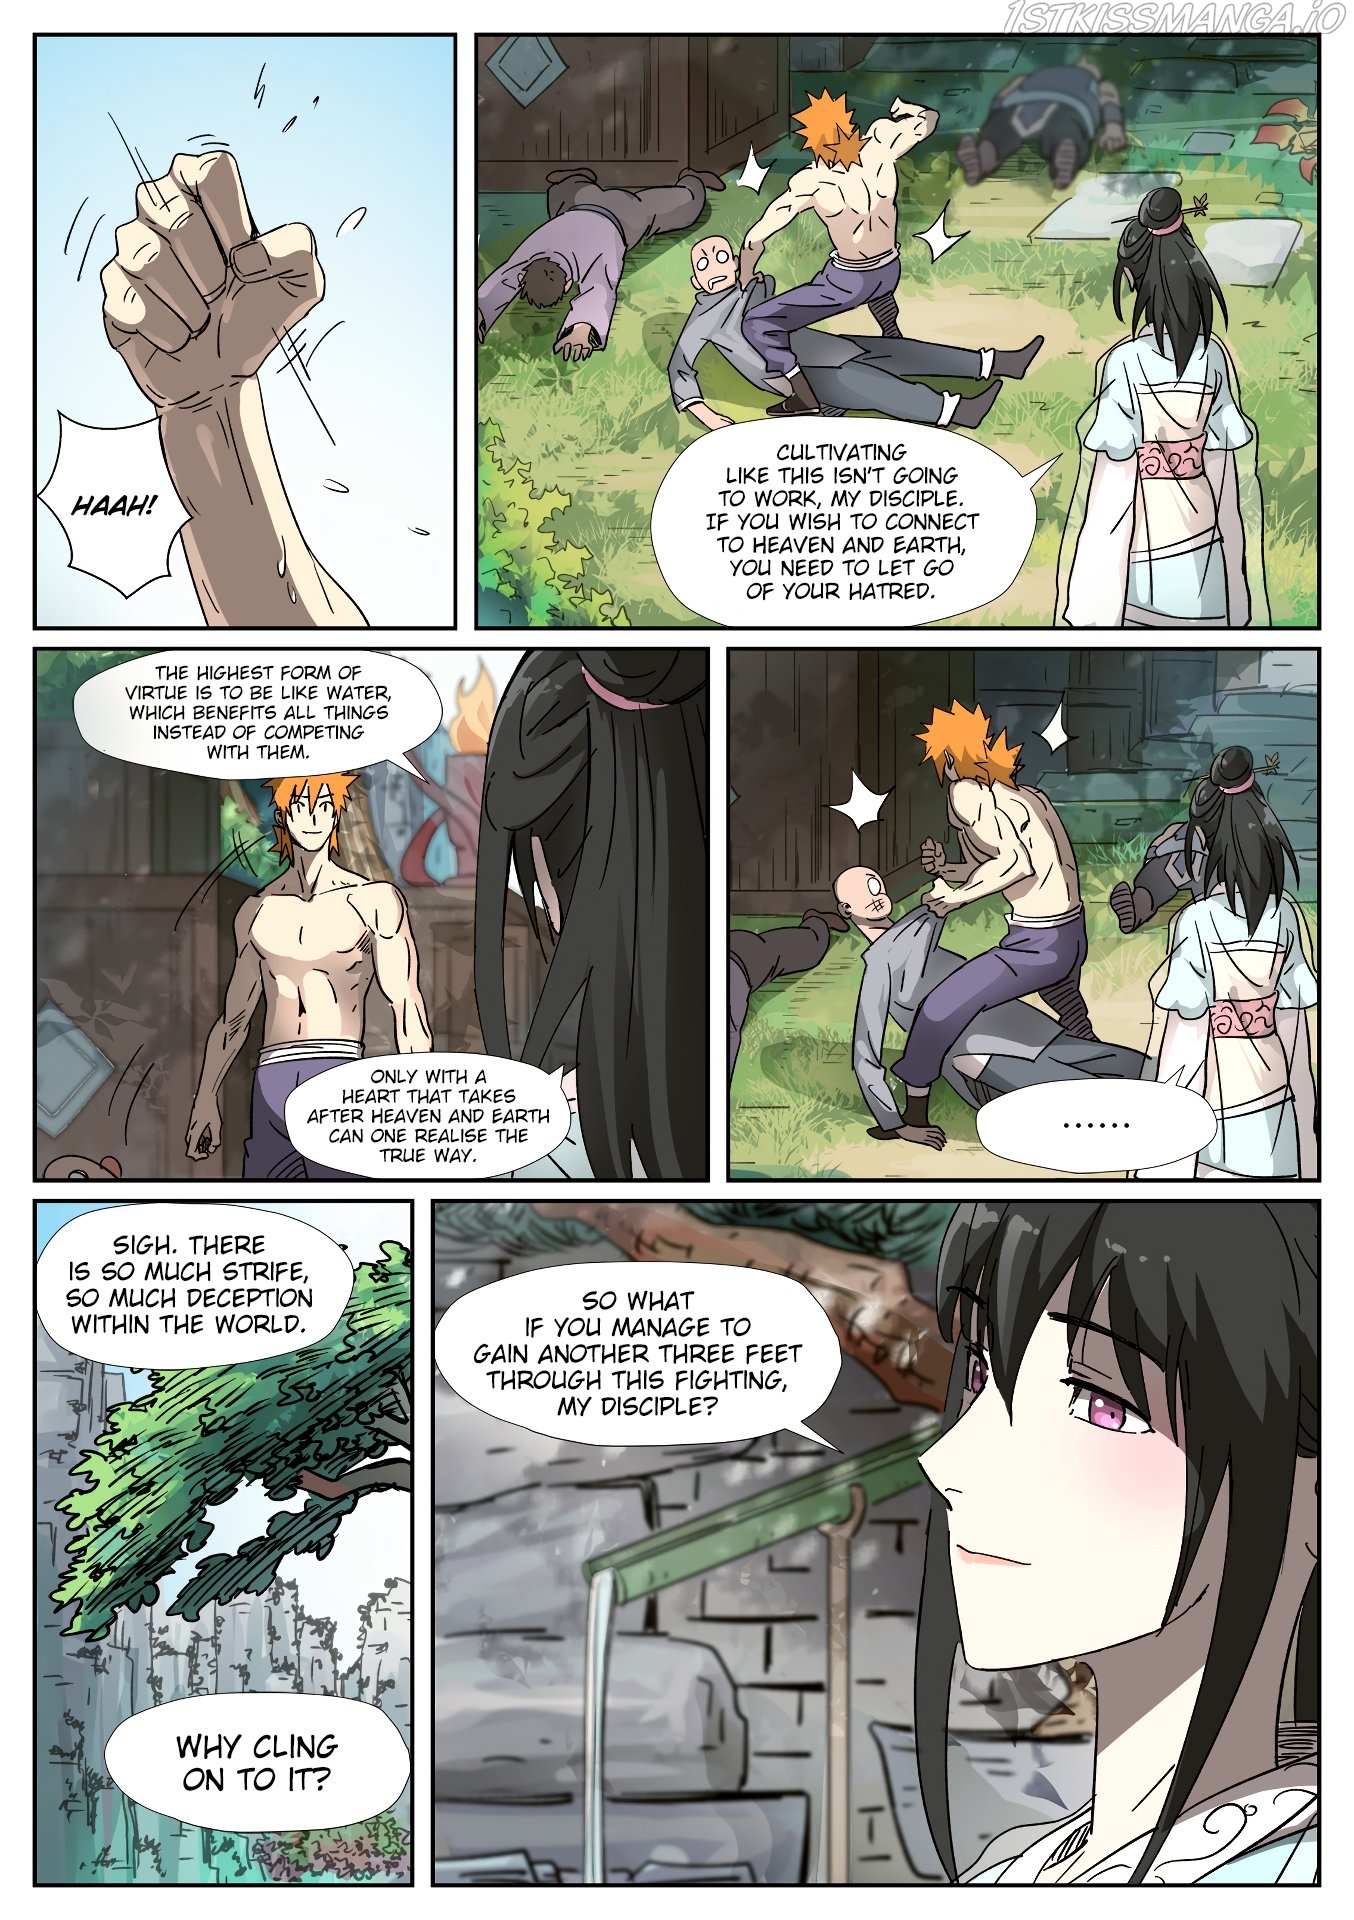 Tales of Demons and Gods Manhua Chapter 311.5 - Page 2